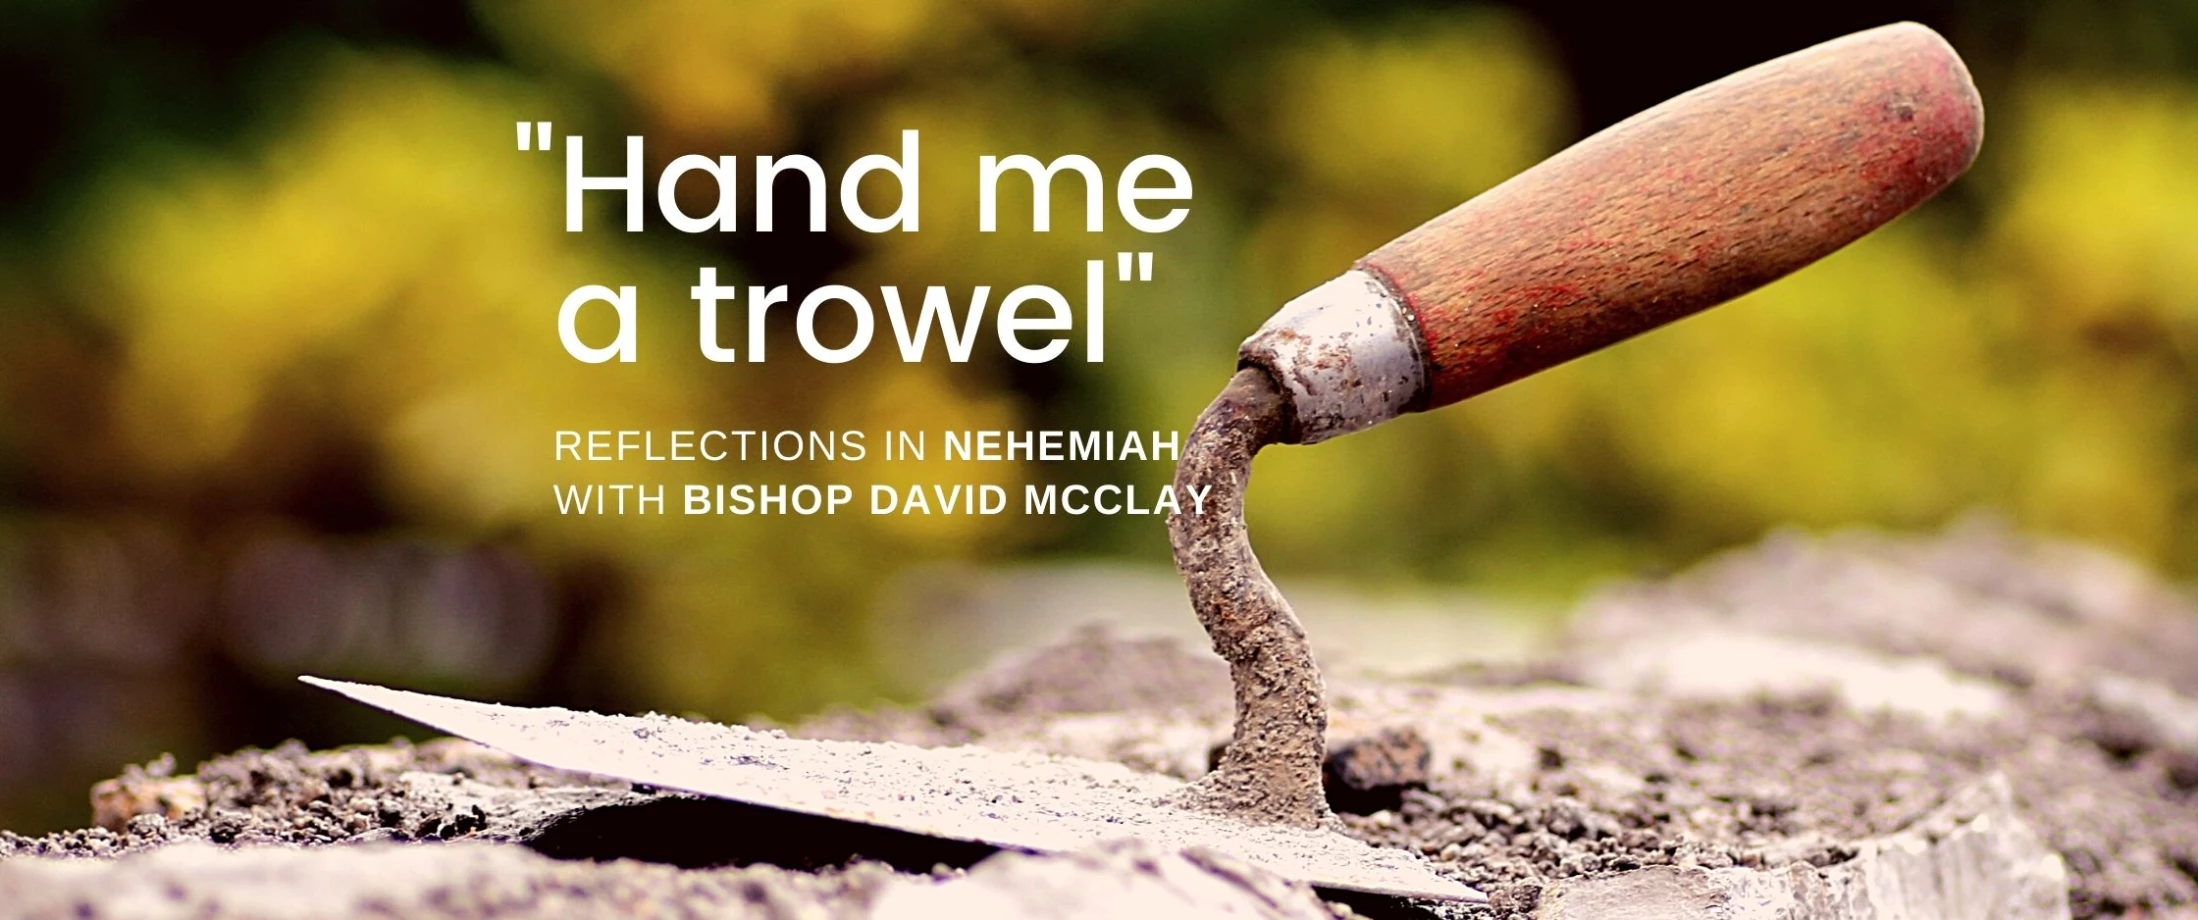 Reflections in Nehemiah for Lent Day 13